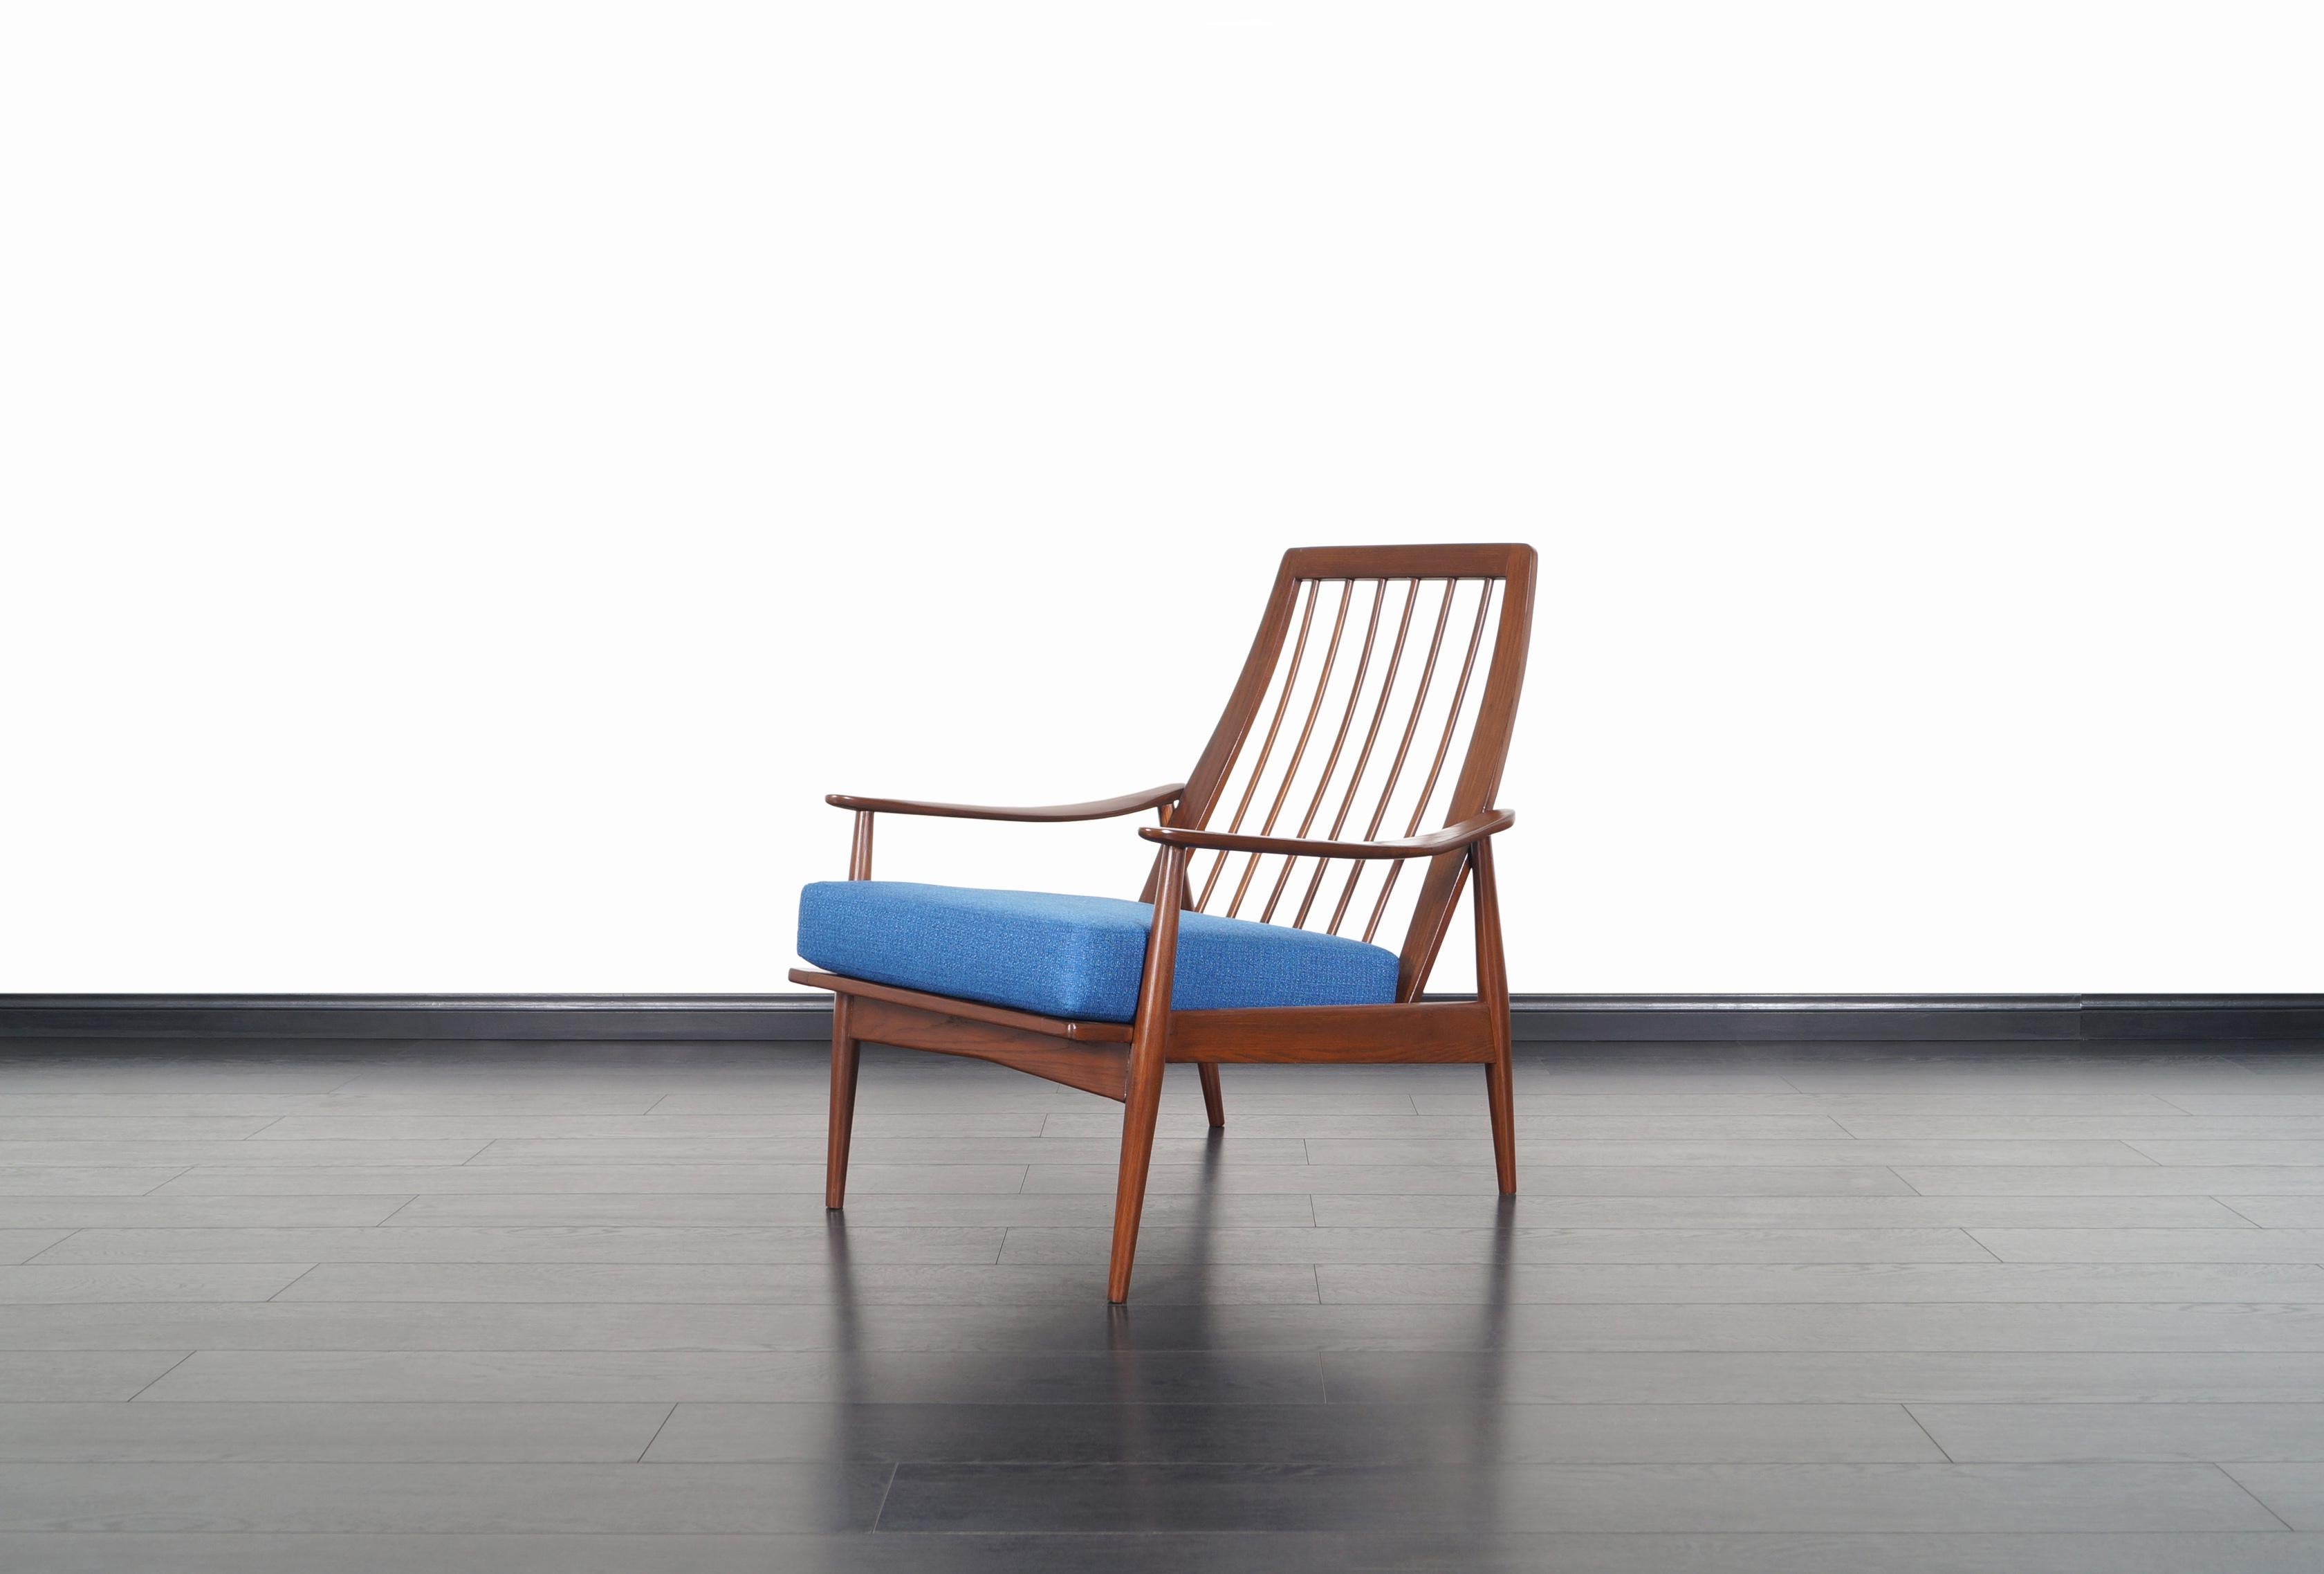 Fabulous Mid-Century Modern lounge chair, manufactured in the United States, circa 1950s. This chair features a solid walnut stained oak frame with sculptural armrests and slatted backrest. The perfectly symmetrical proportions and clean lines on